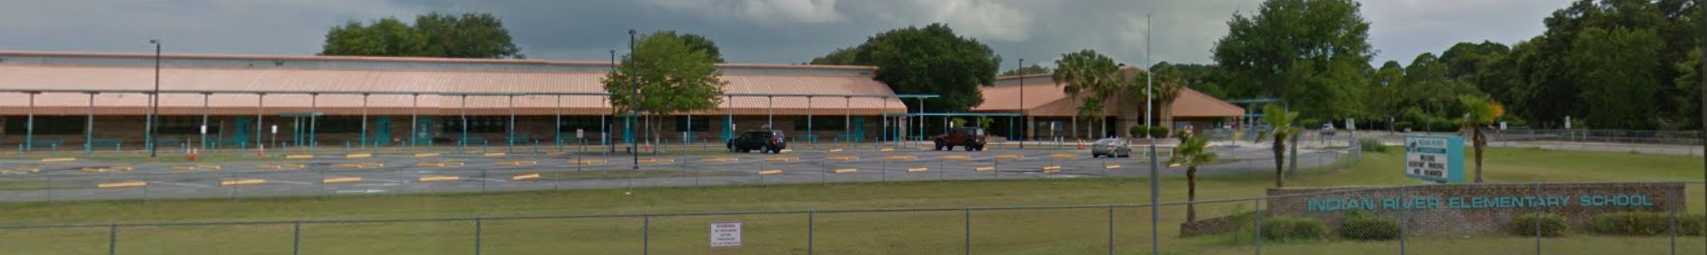 Indian River Elementary